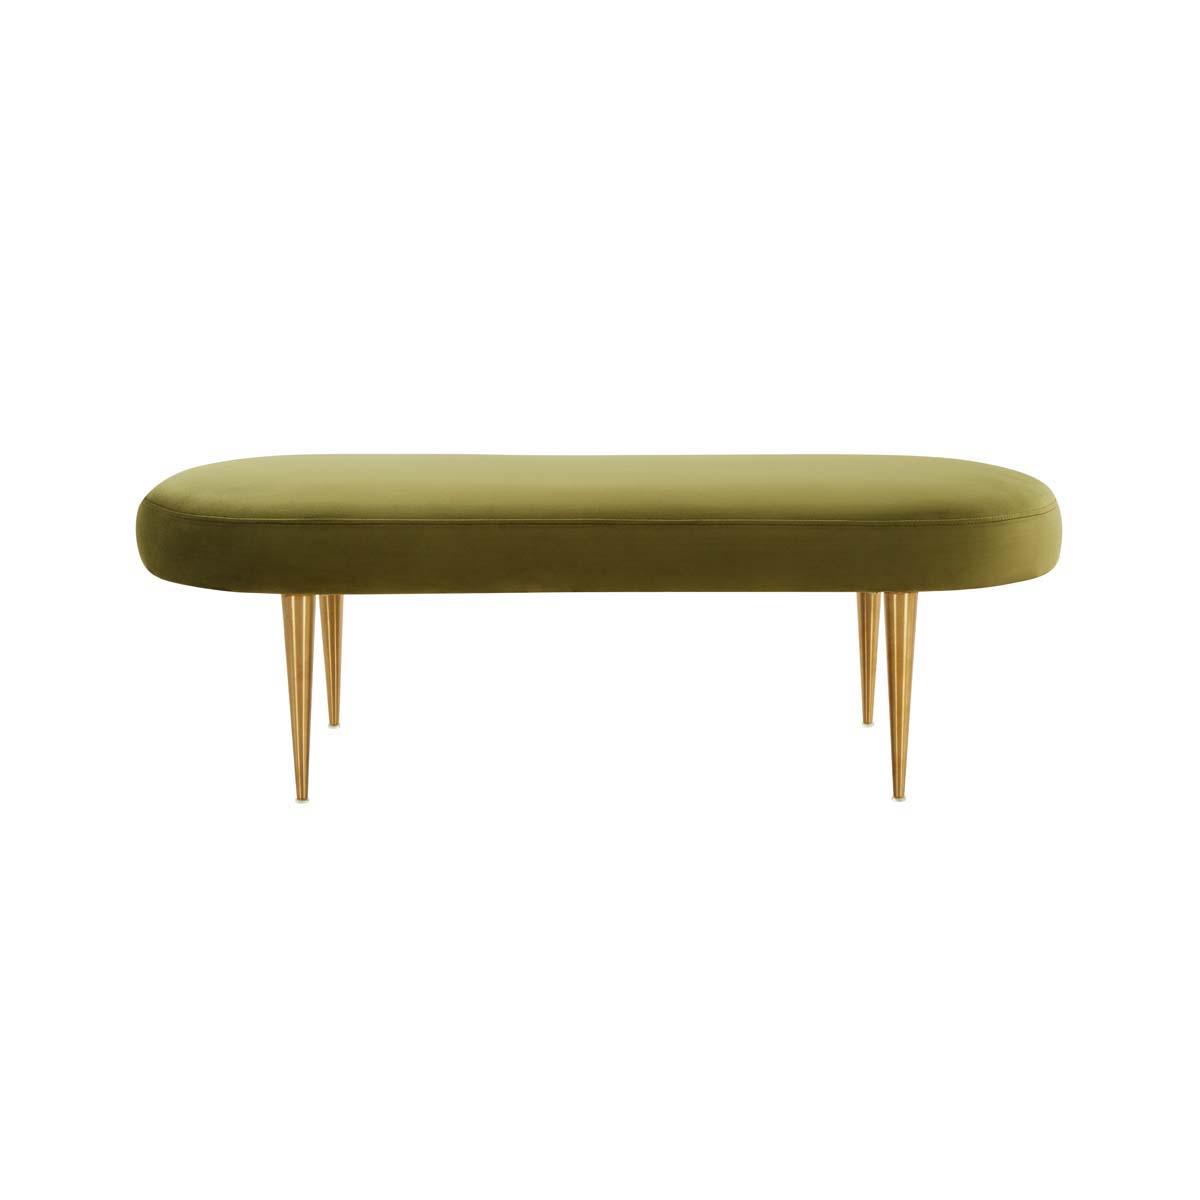 Safavieh Couture Corinne Oval Bench - Olive Green